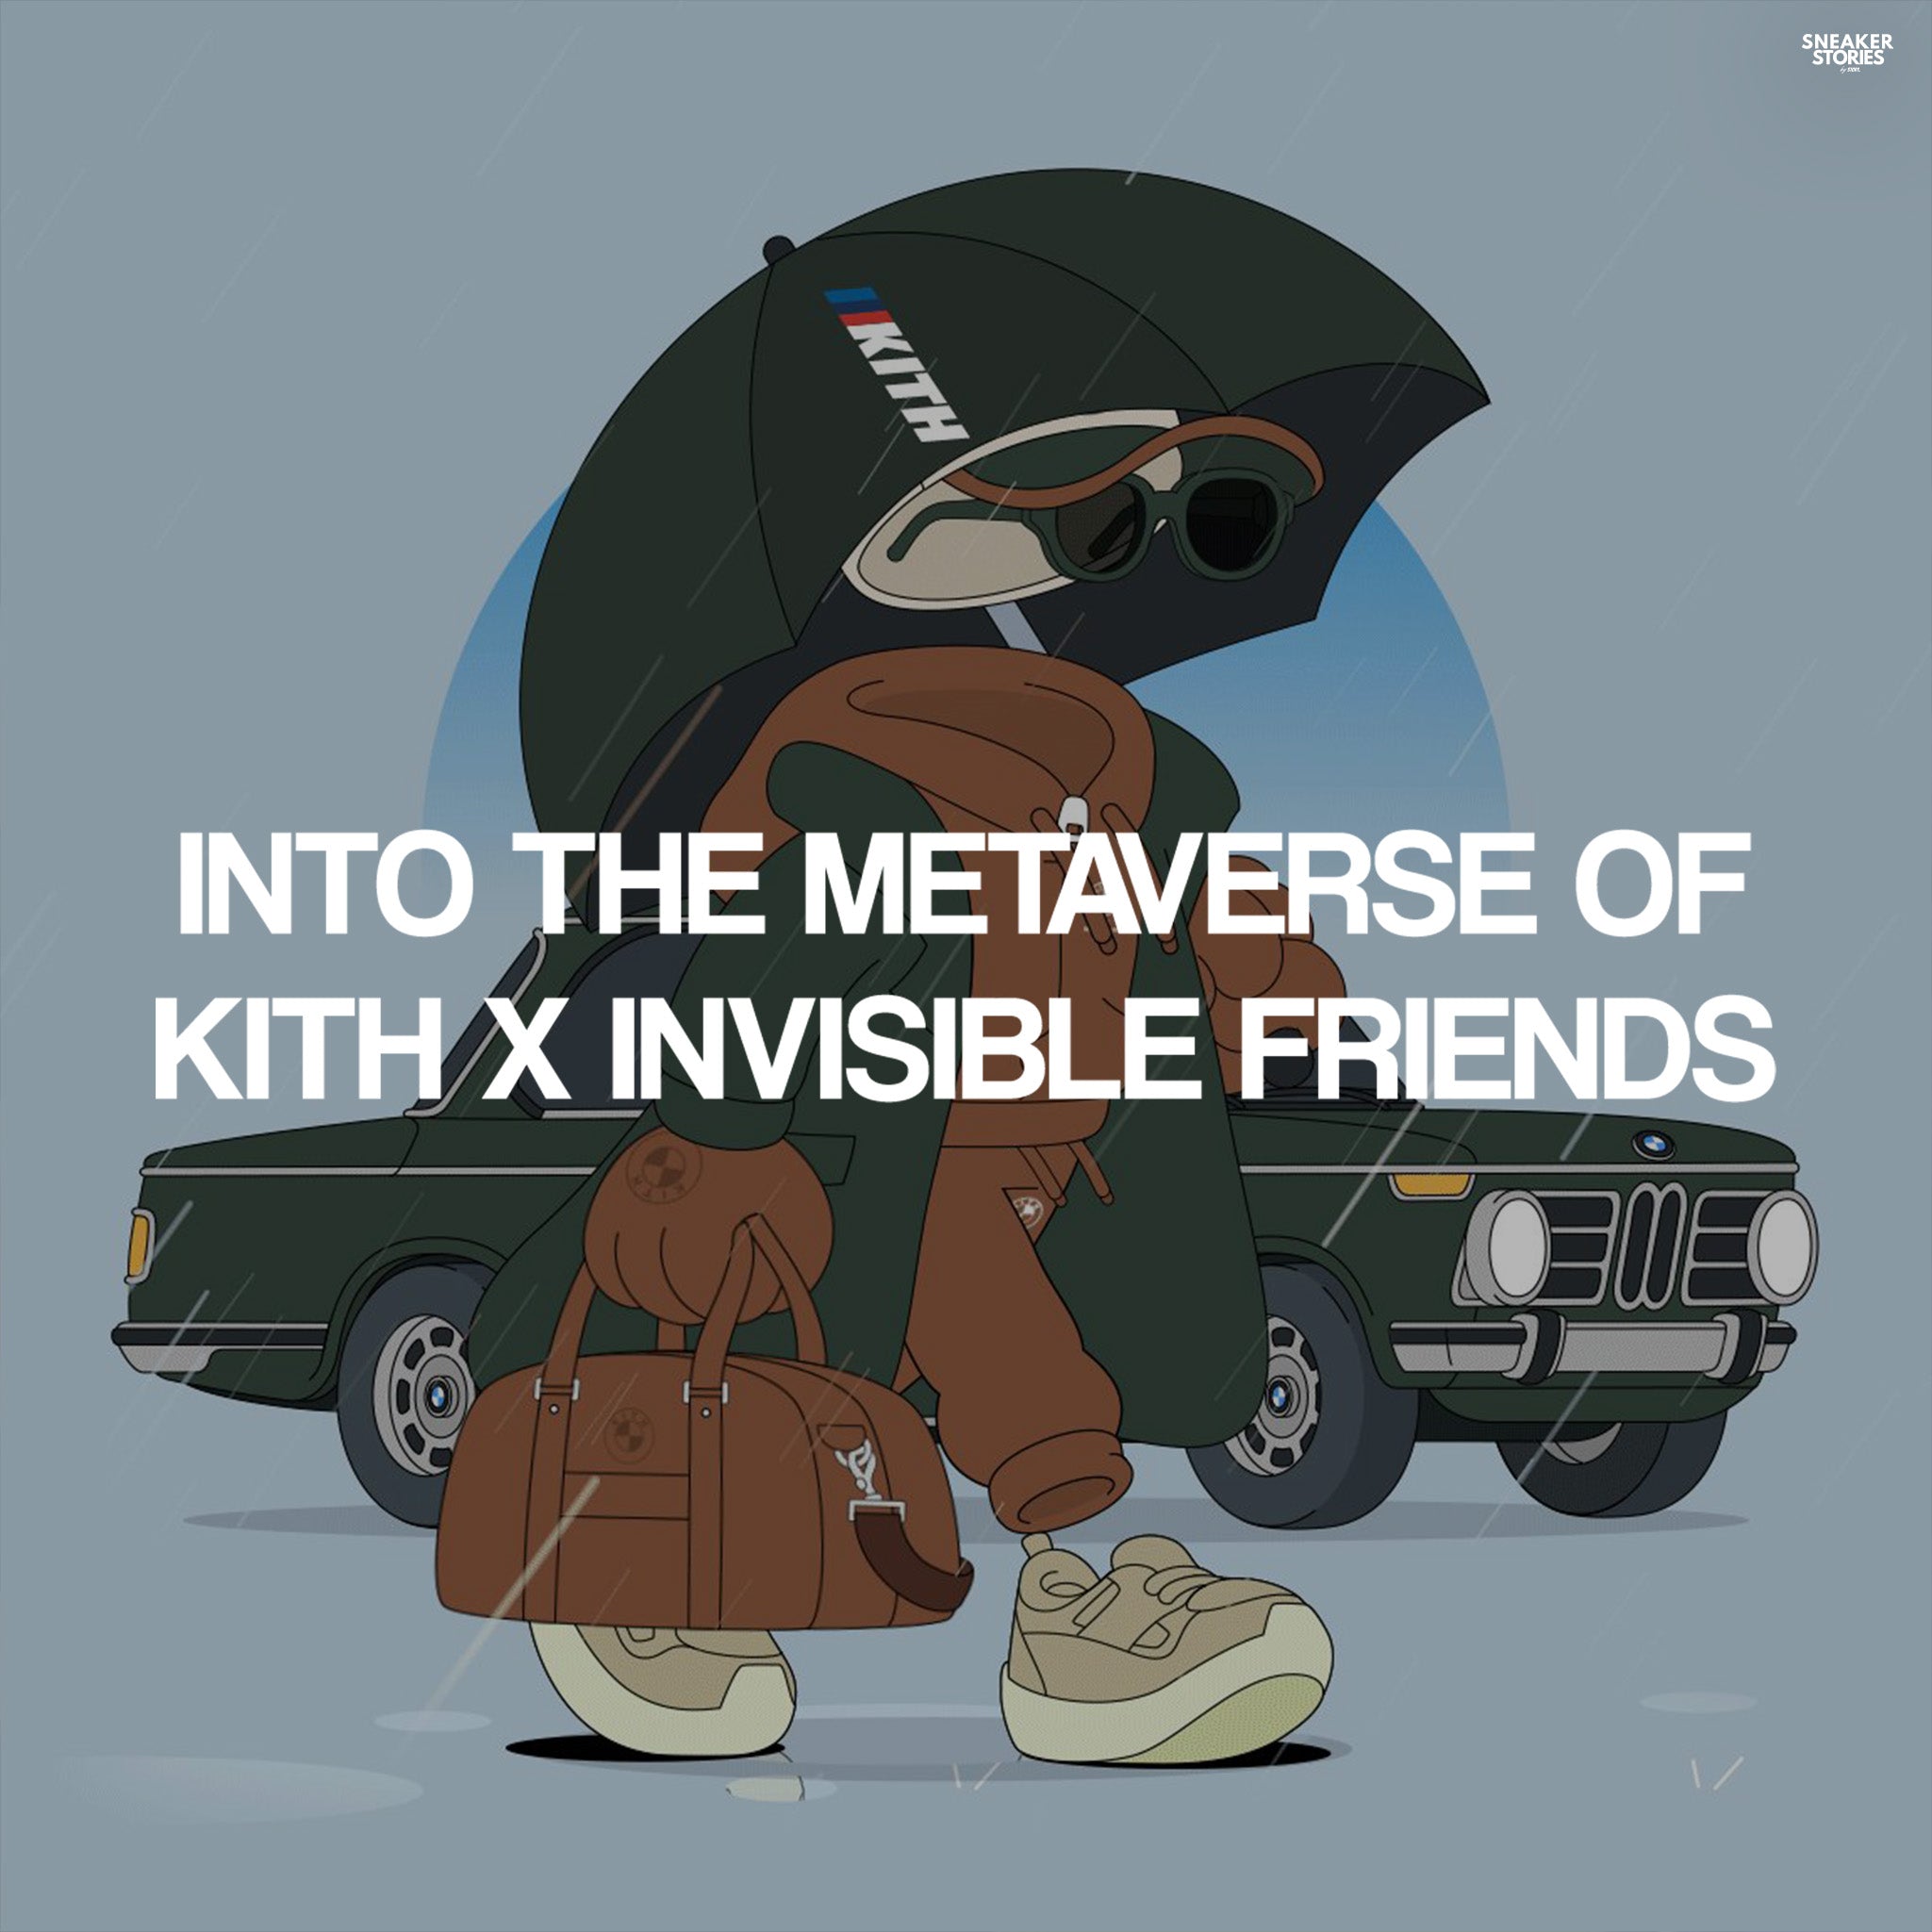 Into the metaverse of KITH x Invisible Friends